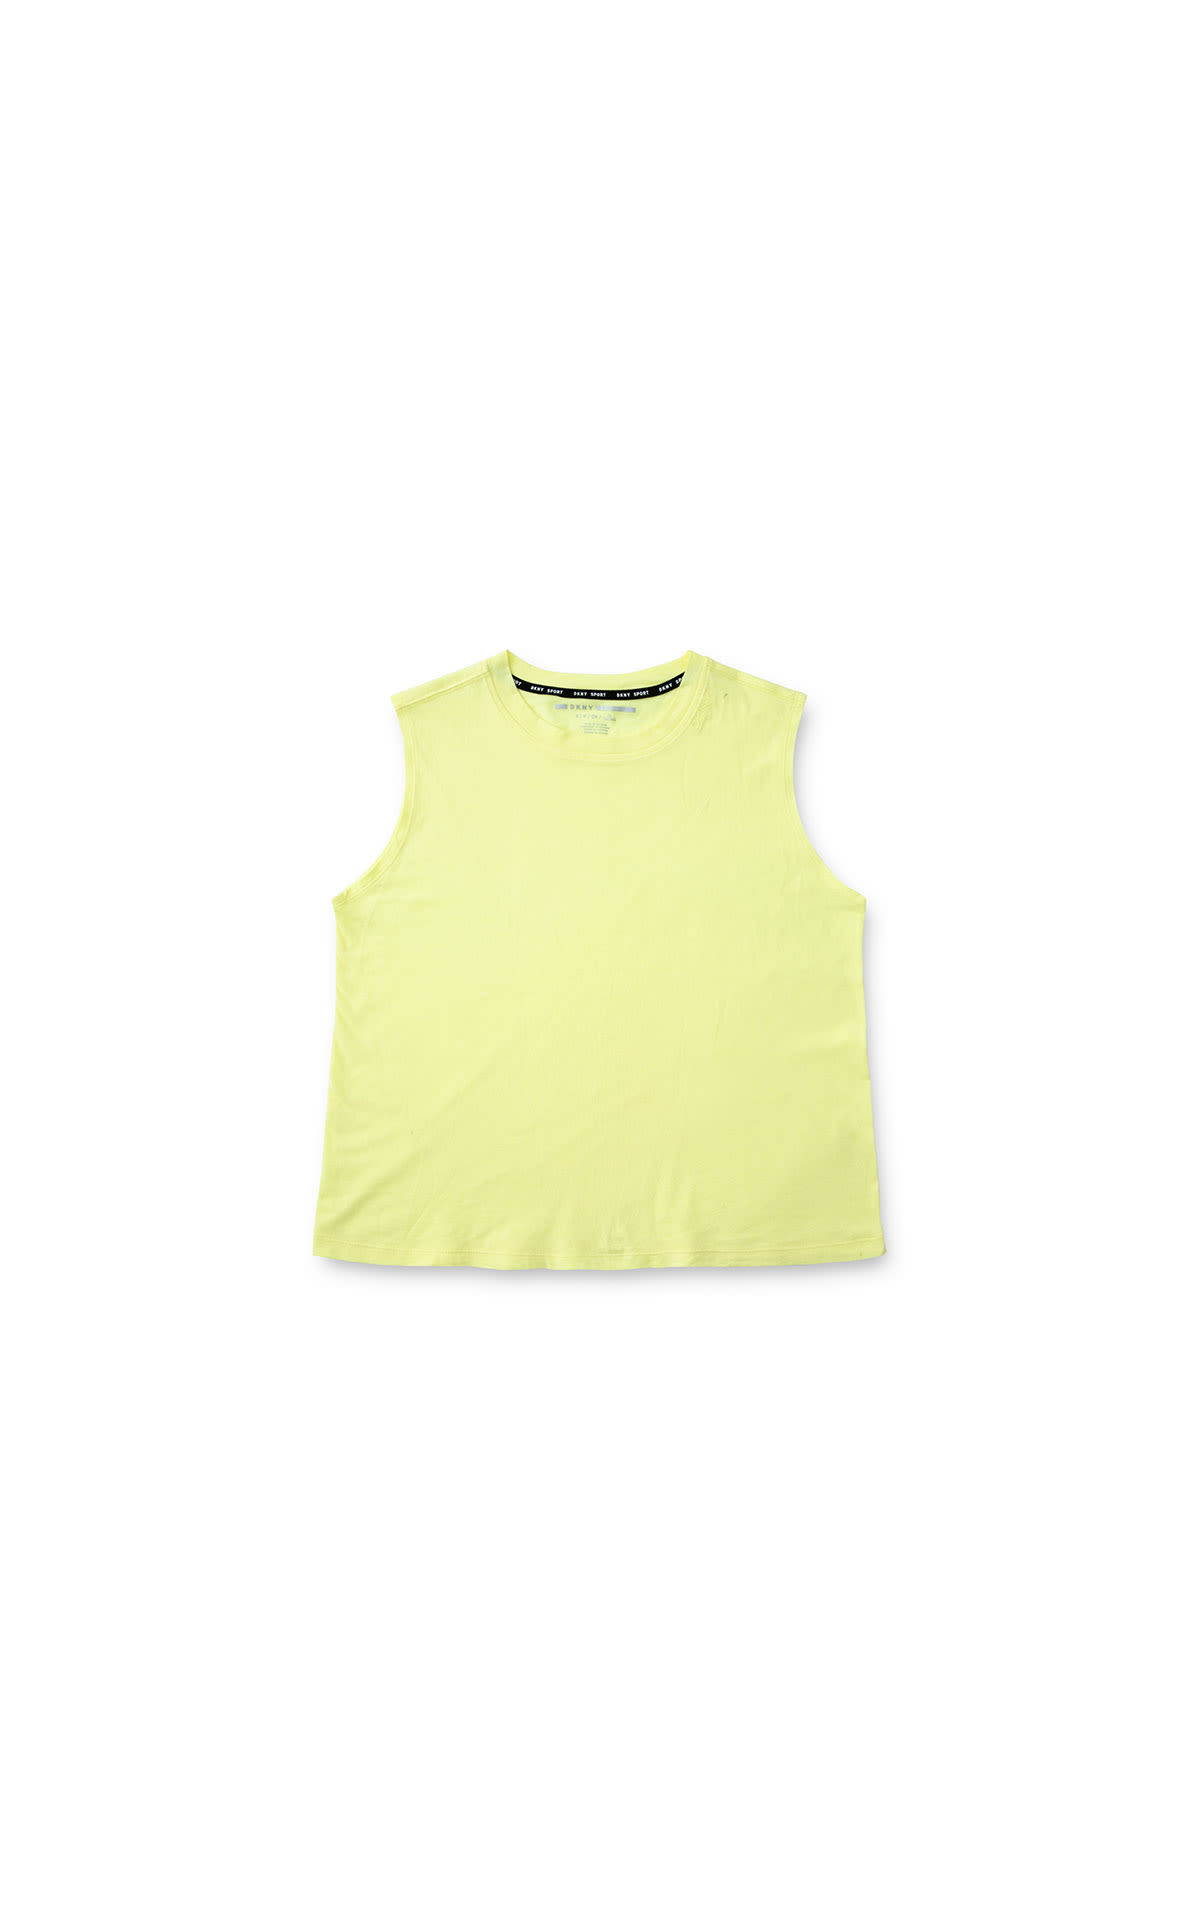 DKNY Twist front logo tank from Bicester Village